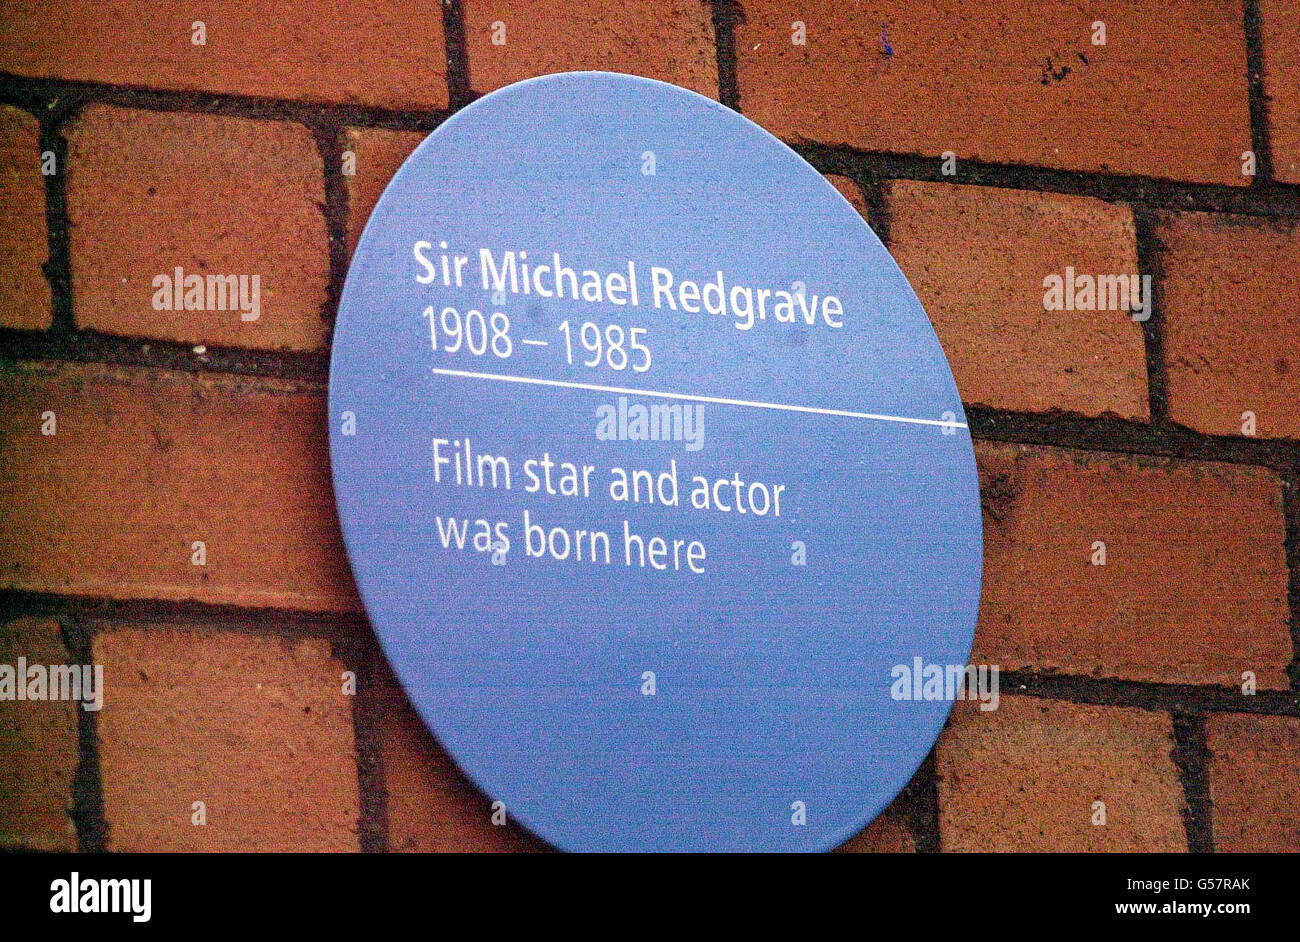 Sir Michael Redgrave was honoured when his Son Corin unveiled a plaque on the house in Horfield Road, Cotham, Bristol, where his father was born in 1908. Mr Redgrave told how Sir Michael was named after St Michael's church, in Bristol. * even though his grandmother only stayed a few days in the house opposite in 1908. Stock Photo